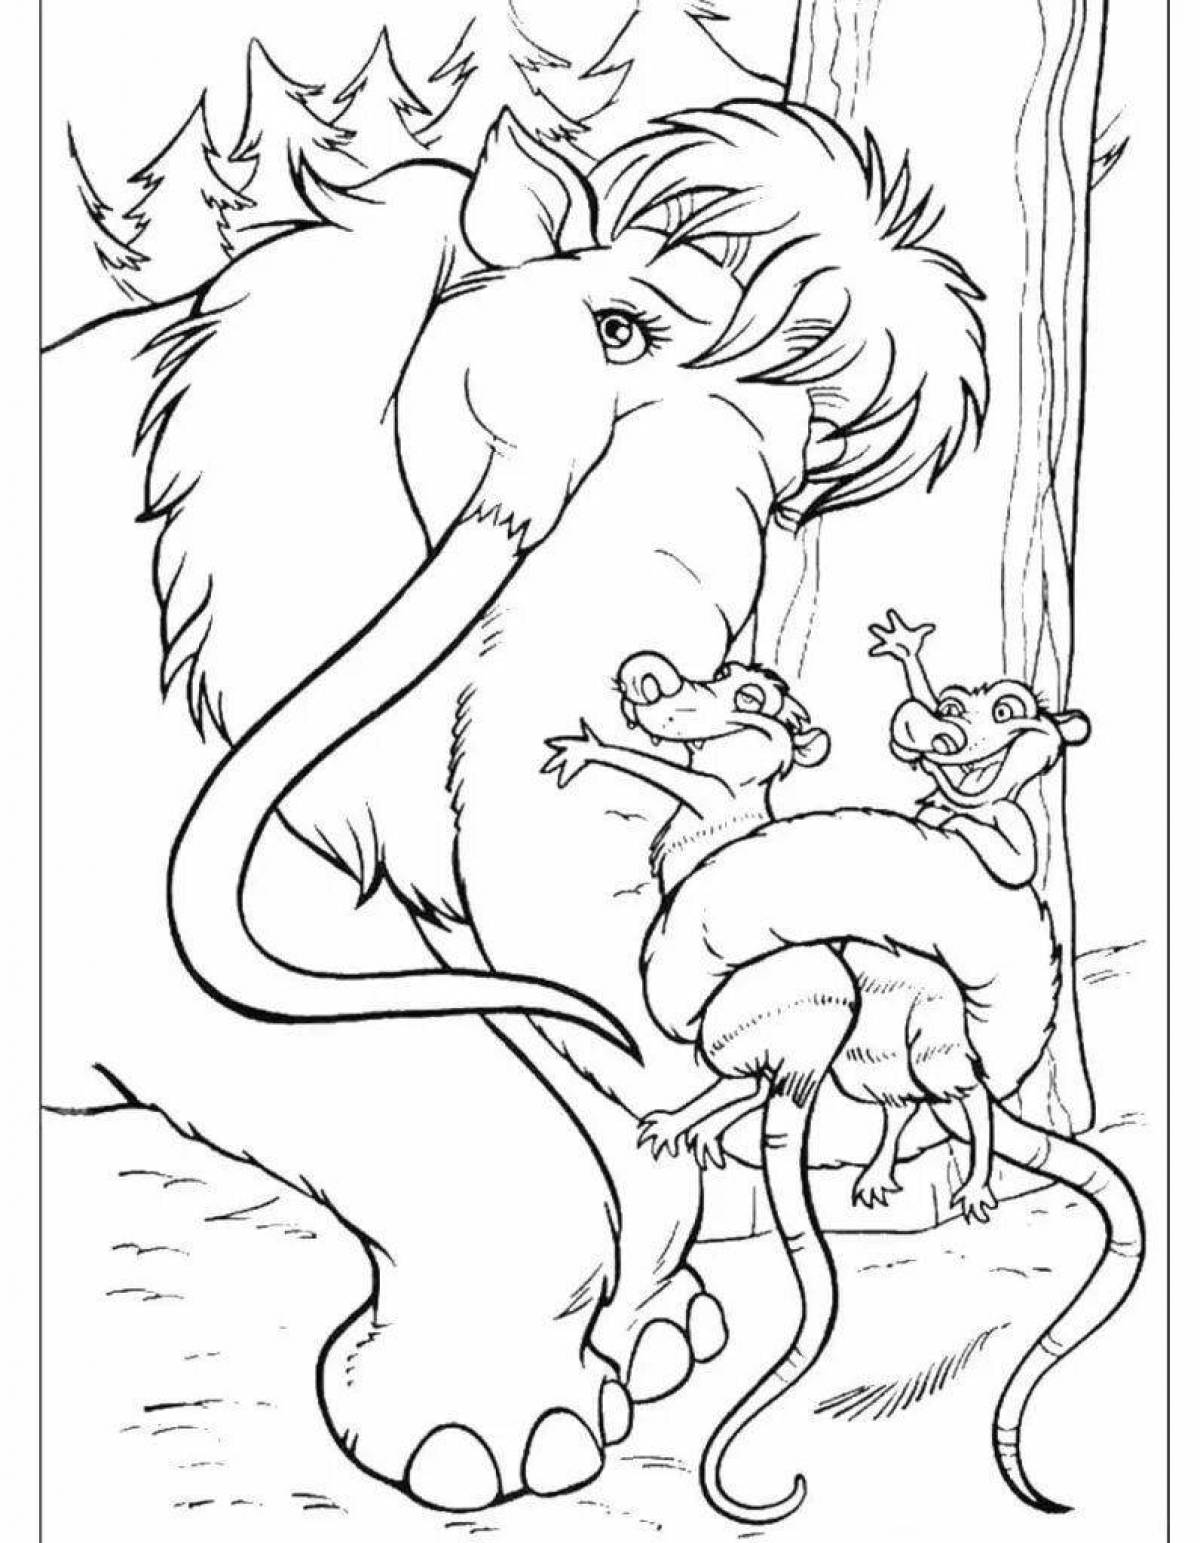 Splendid ice age 4 coloring page